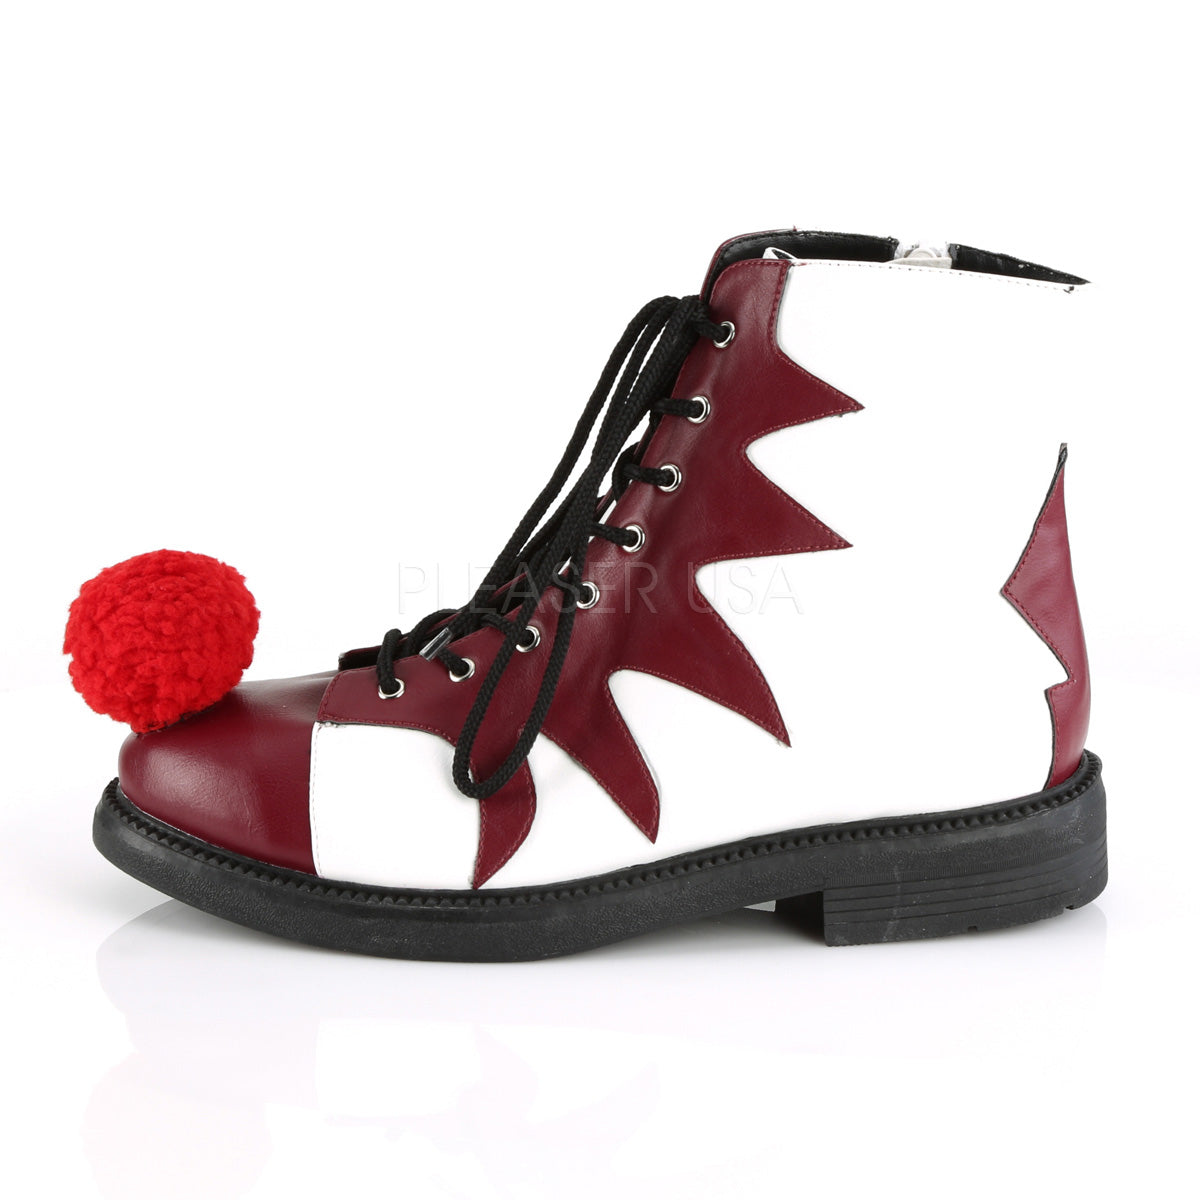 IT Cosplay Clown Boots